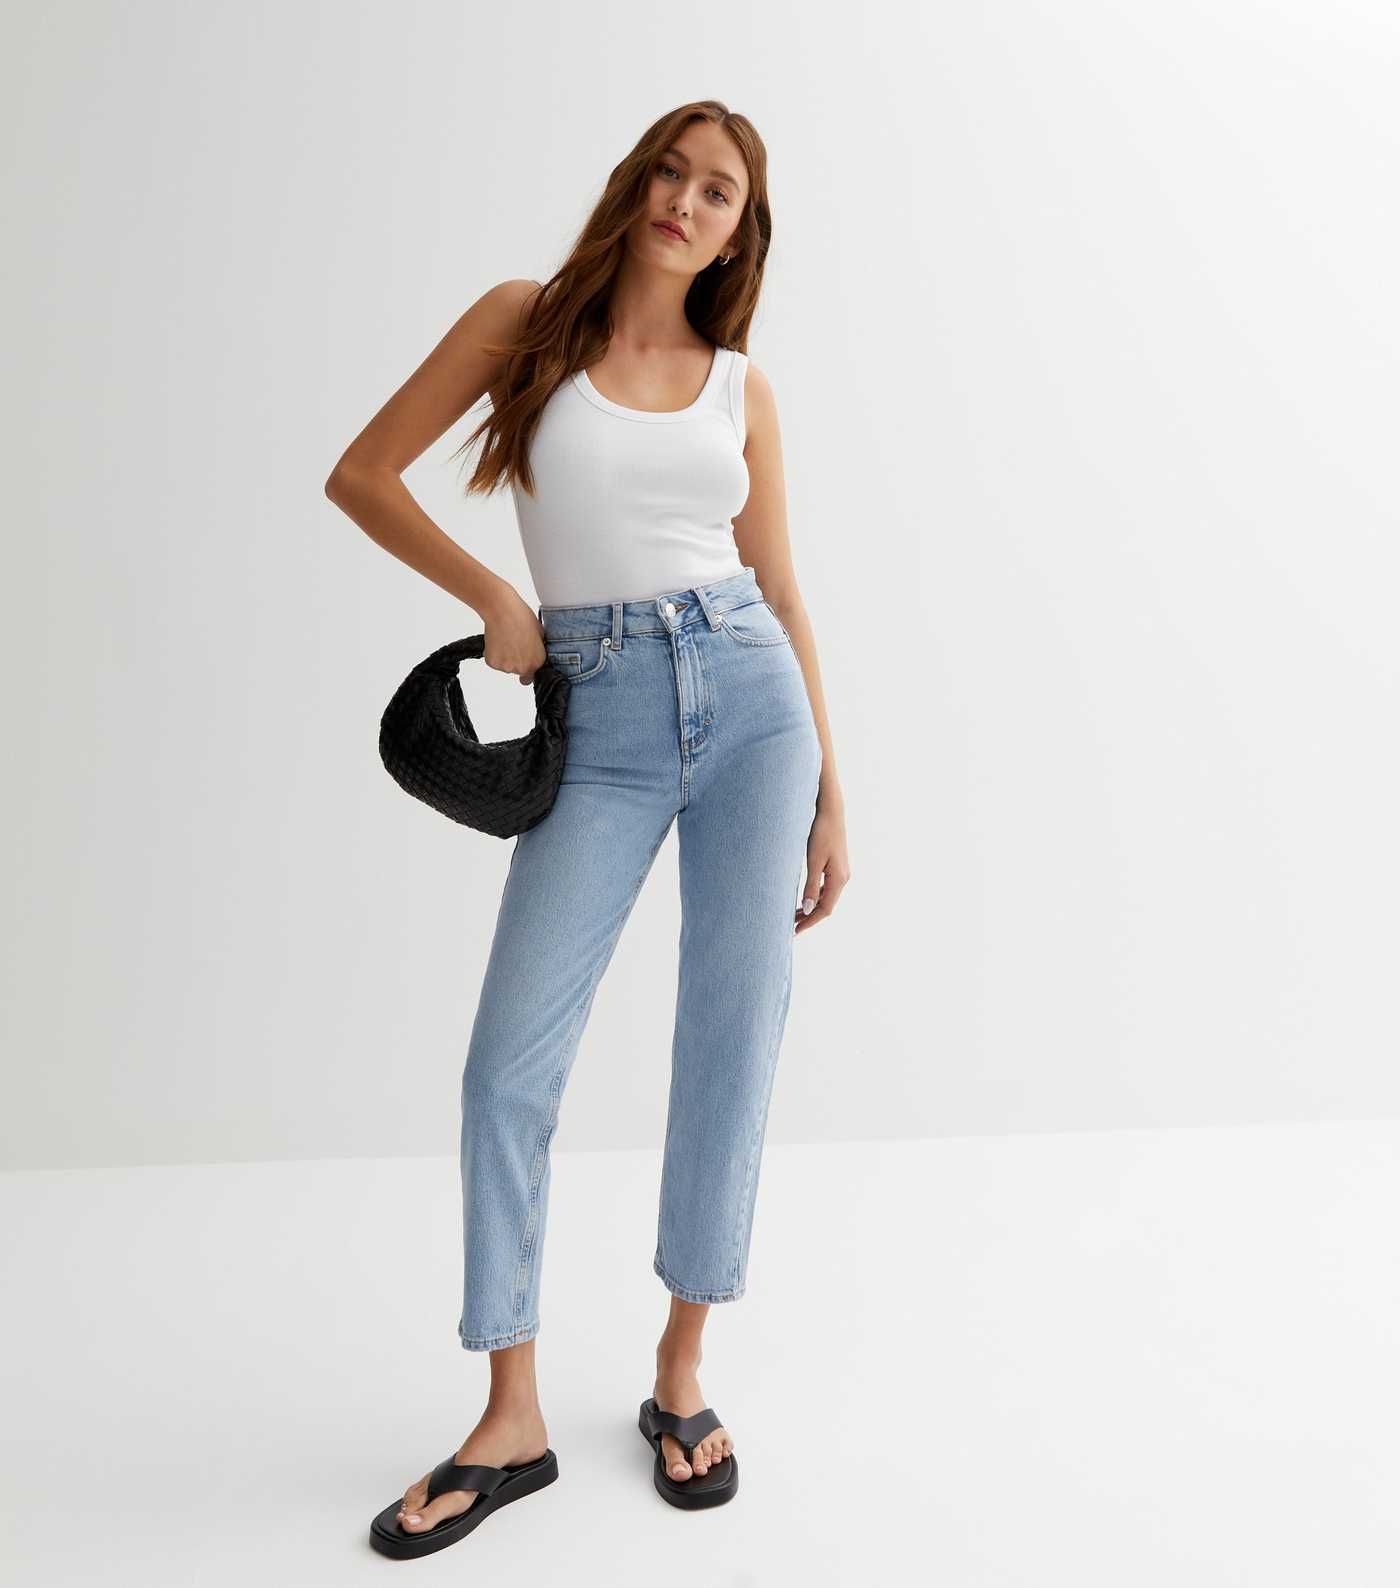 Blue Waist Enhance Tori Mom Jeans
						
						Add to Saved Items
						Remove from Saved Items | New Look (UK)